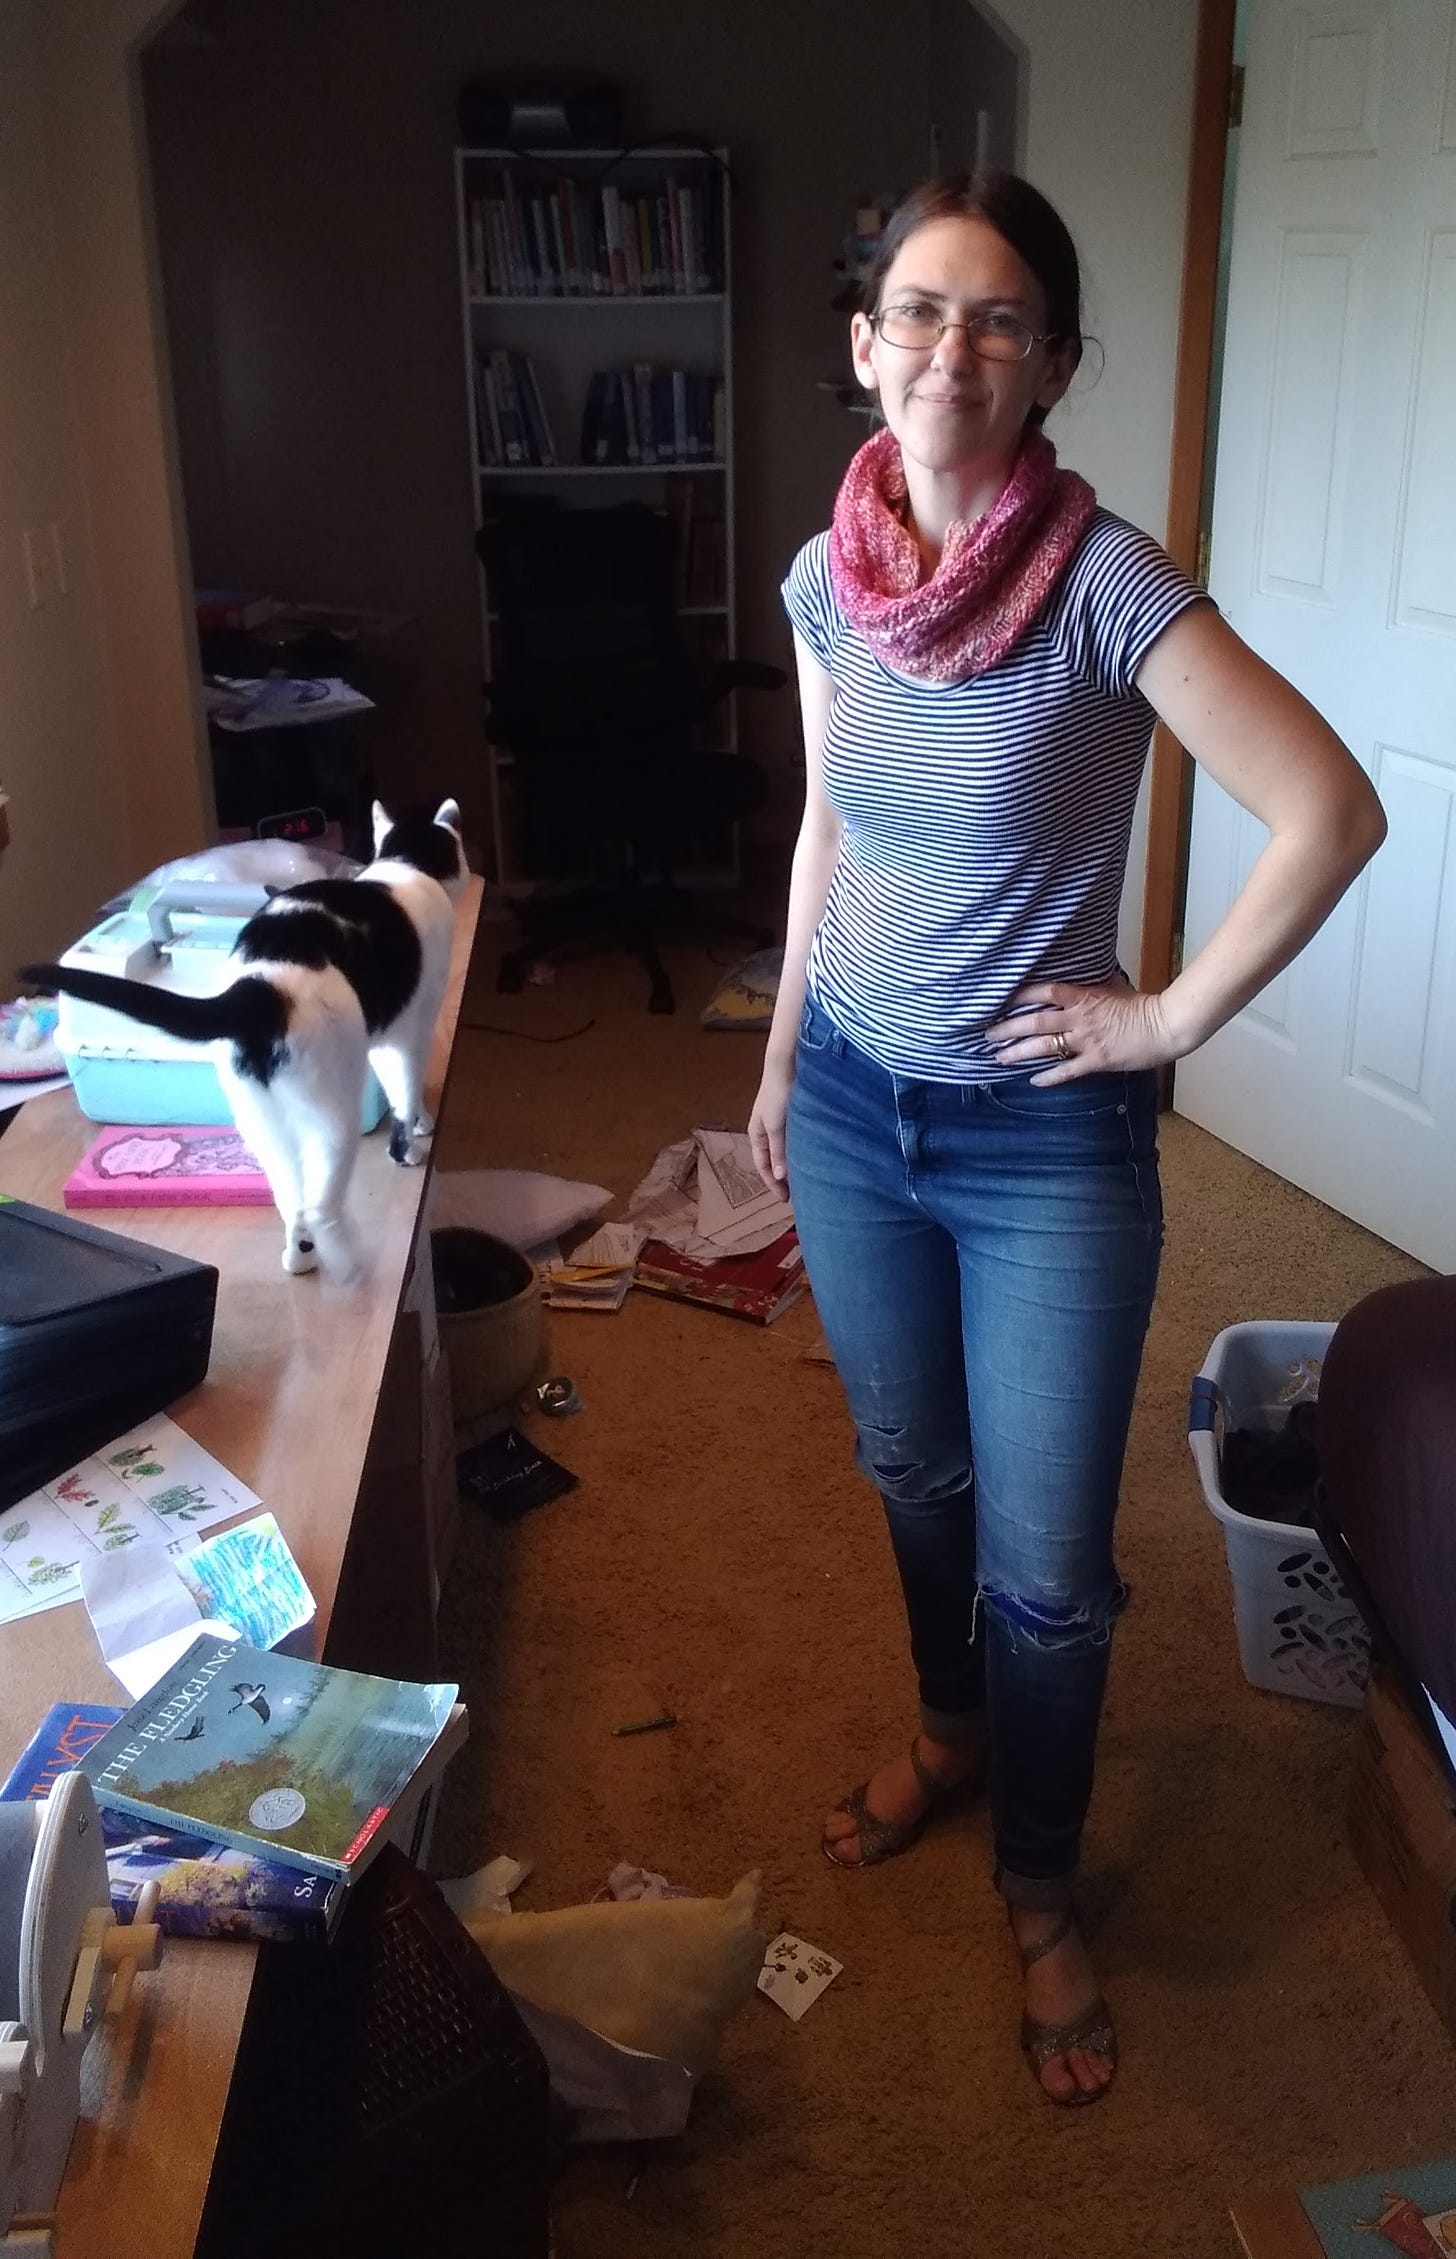 Me with a black and white striped shirt, jeans, strappy silver sandals, and my pink knit cowl. And a cat.